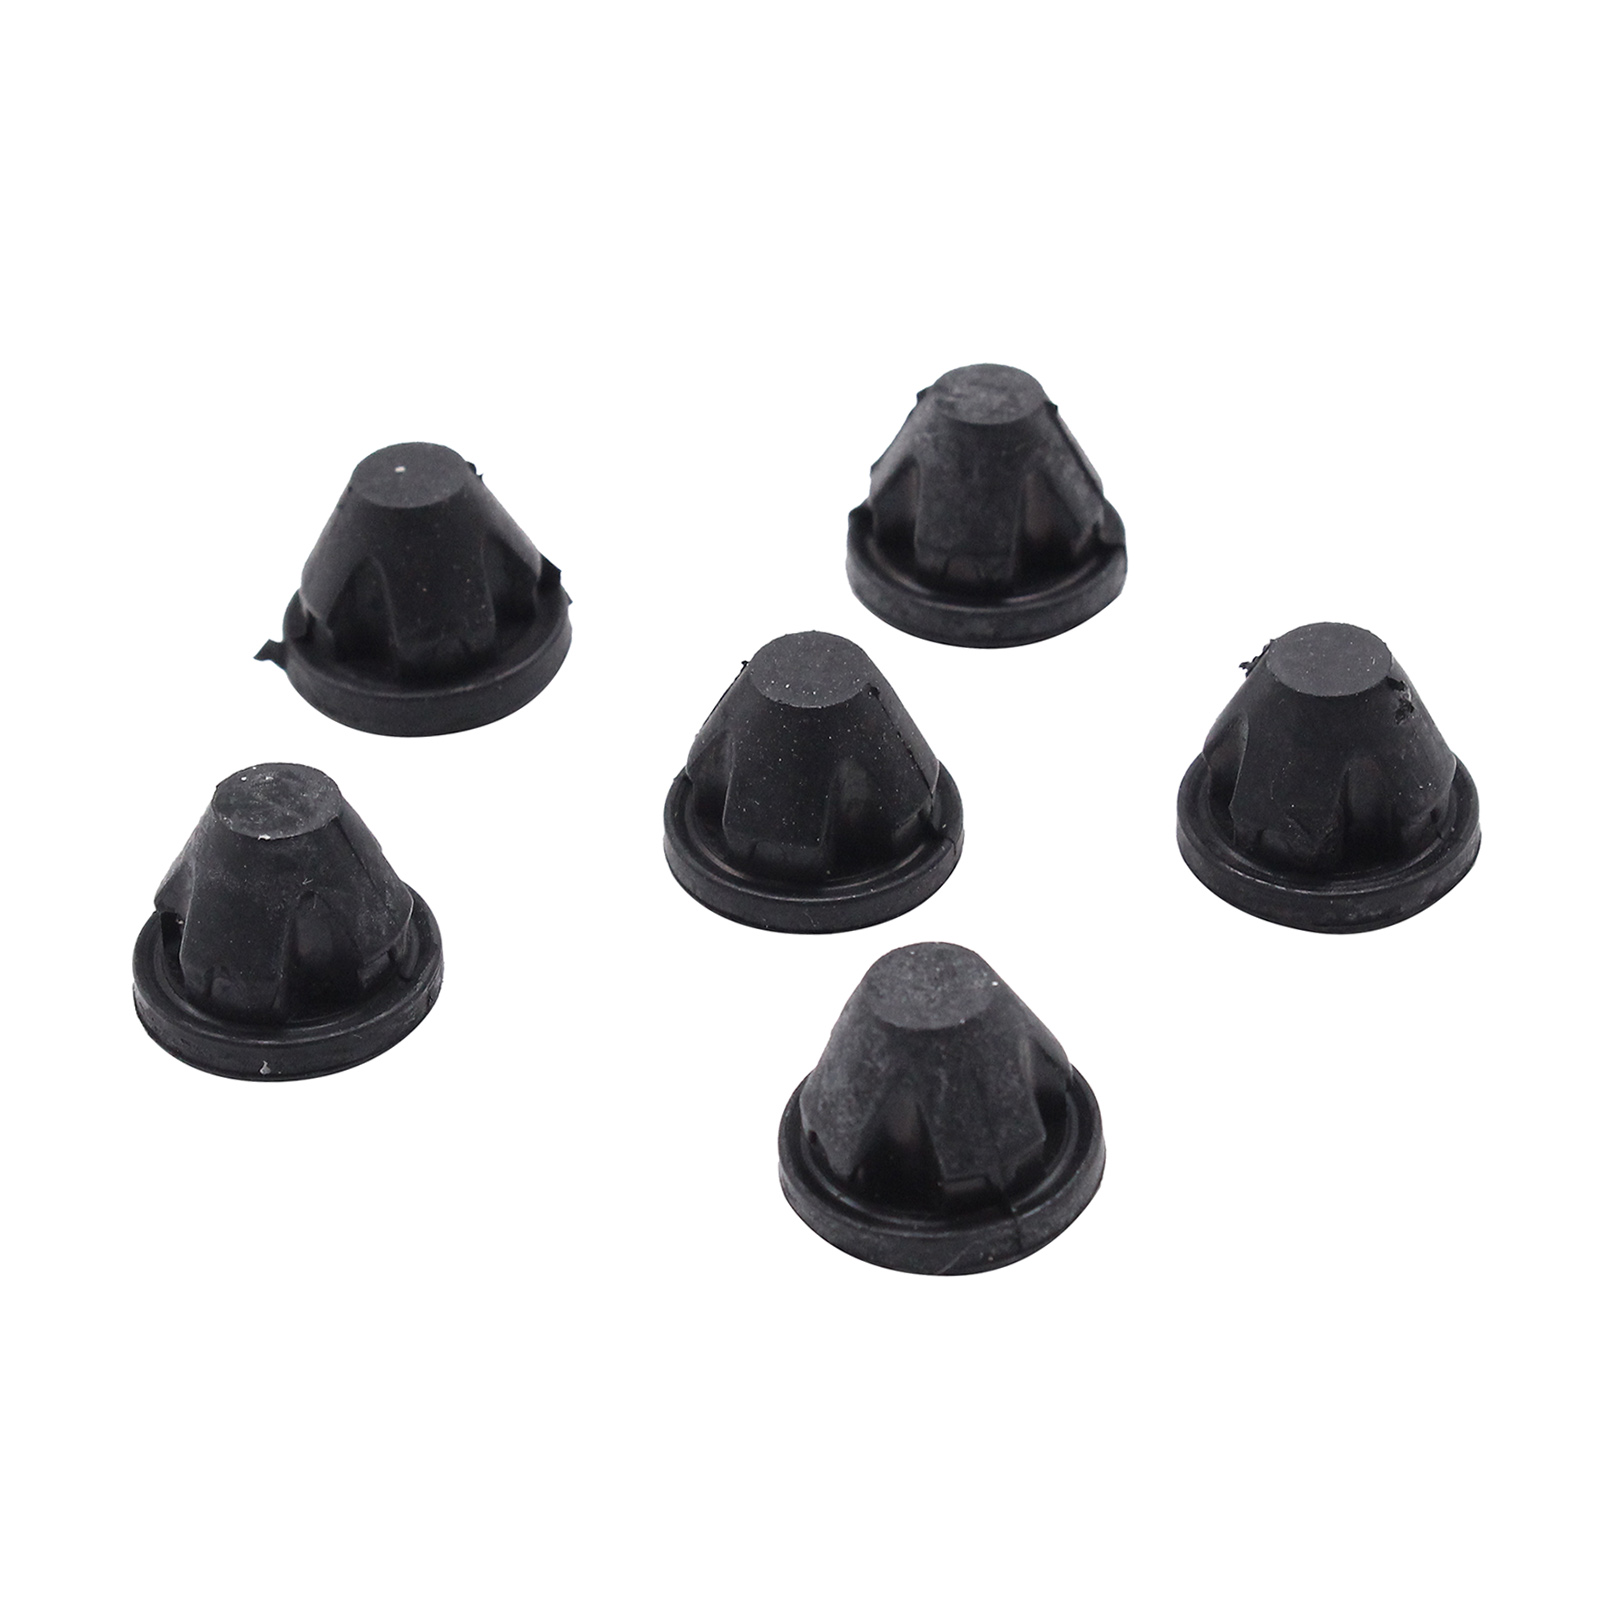 03G103184C Engine Cover Grommet Rubber Trim Fits for PD100 PD140 PD170 Qiilu 6 pcs Engine Cover Grommets